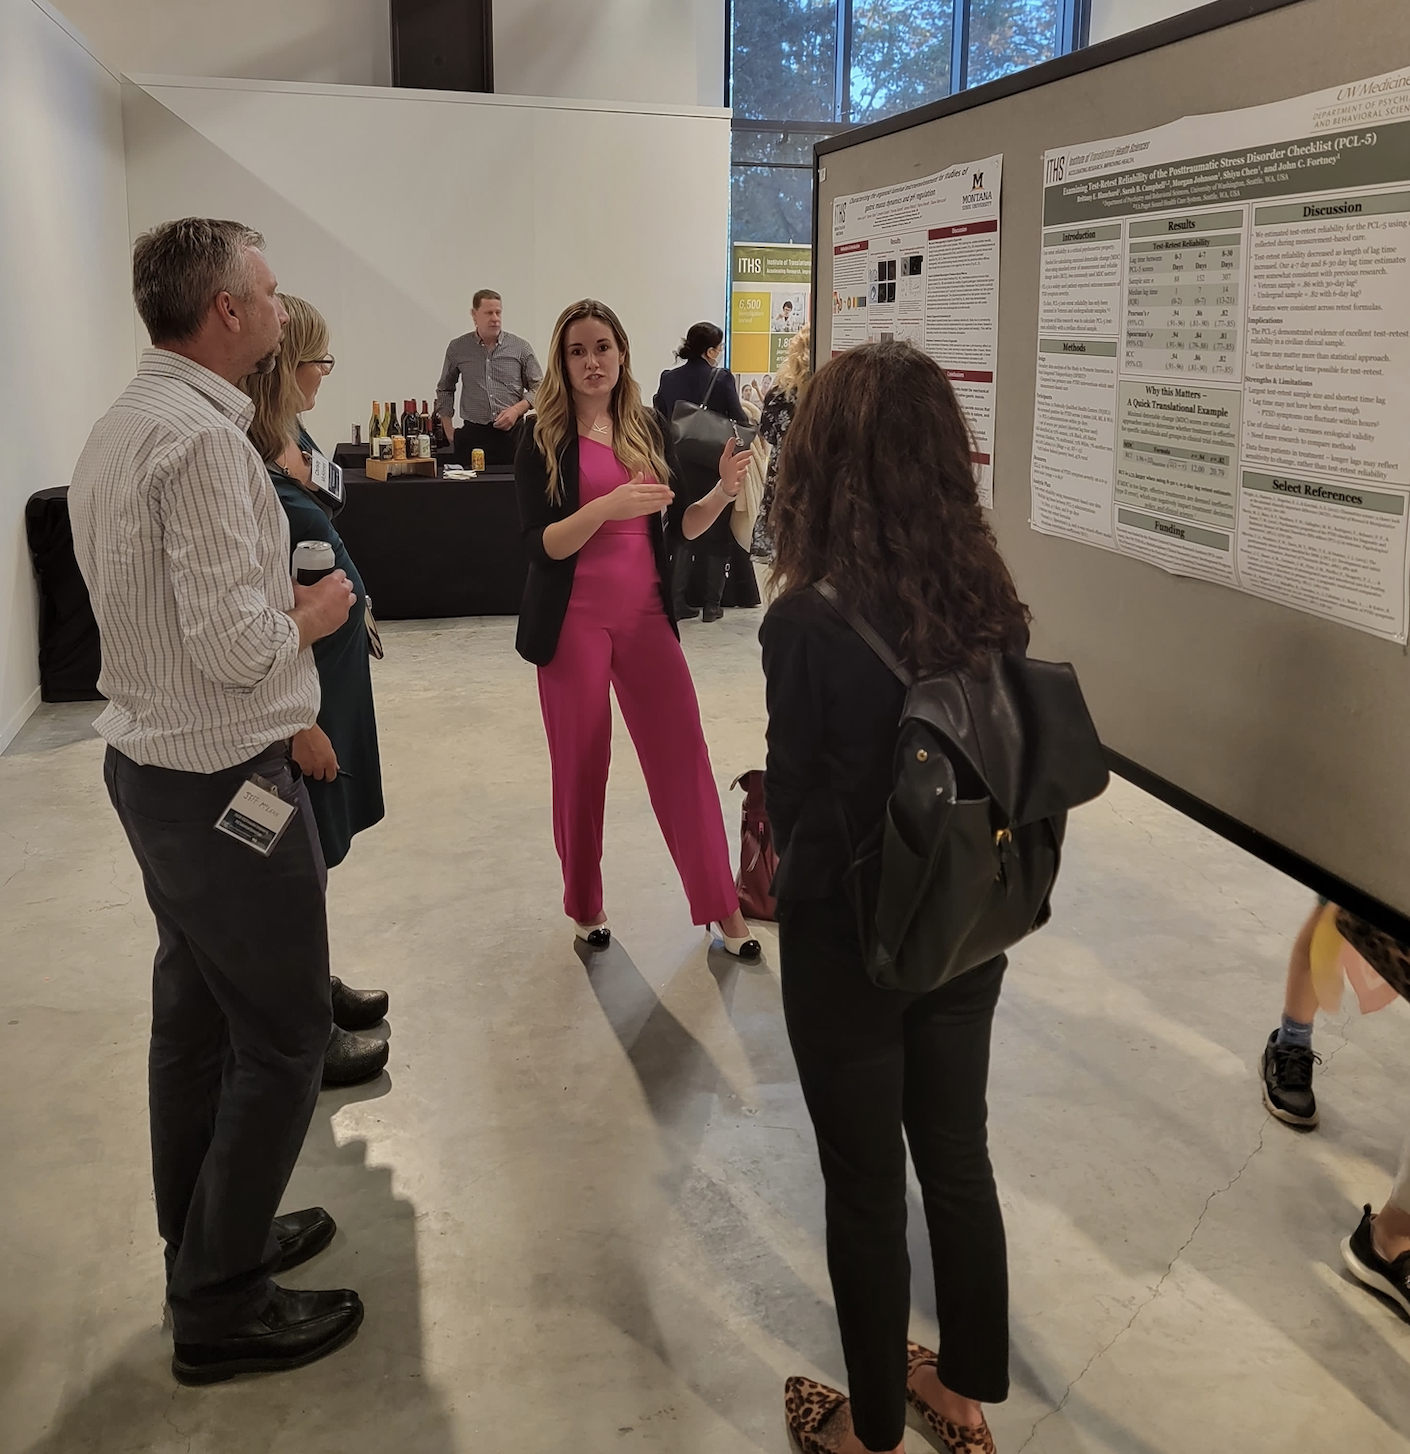 Katrina talking with colleagues at her poster